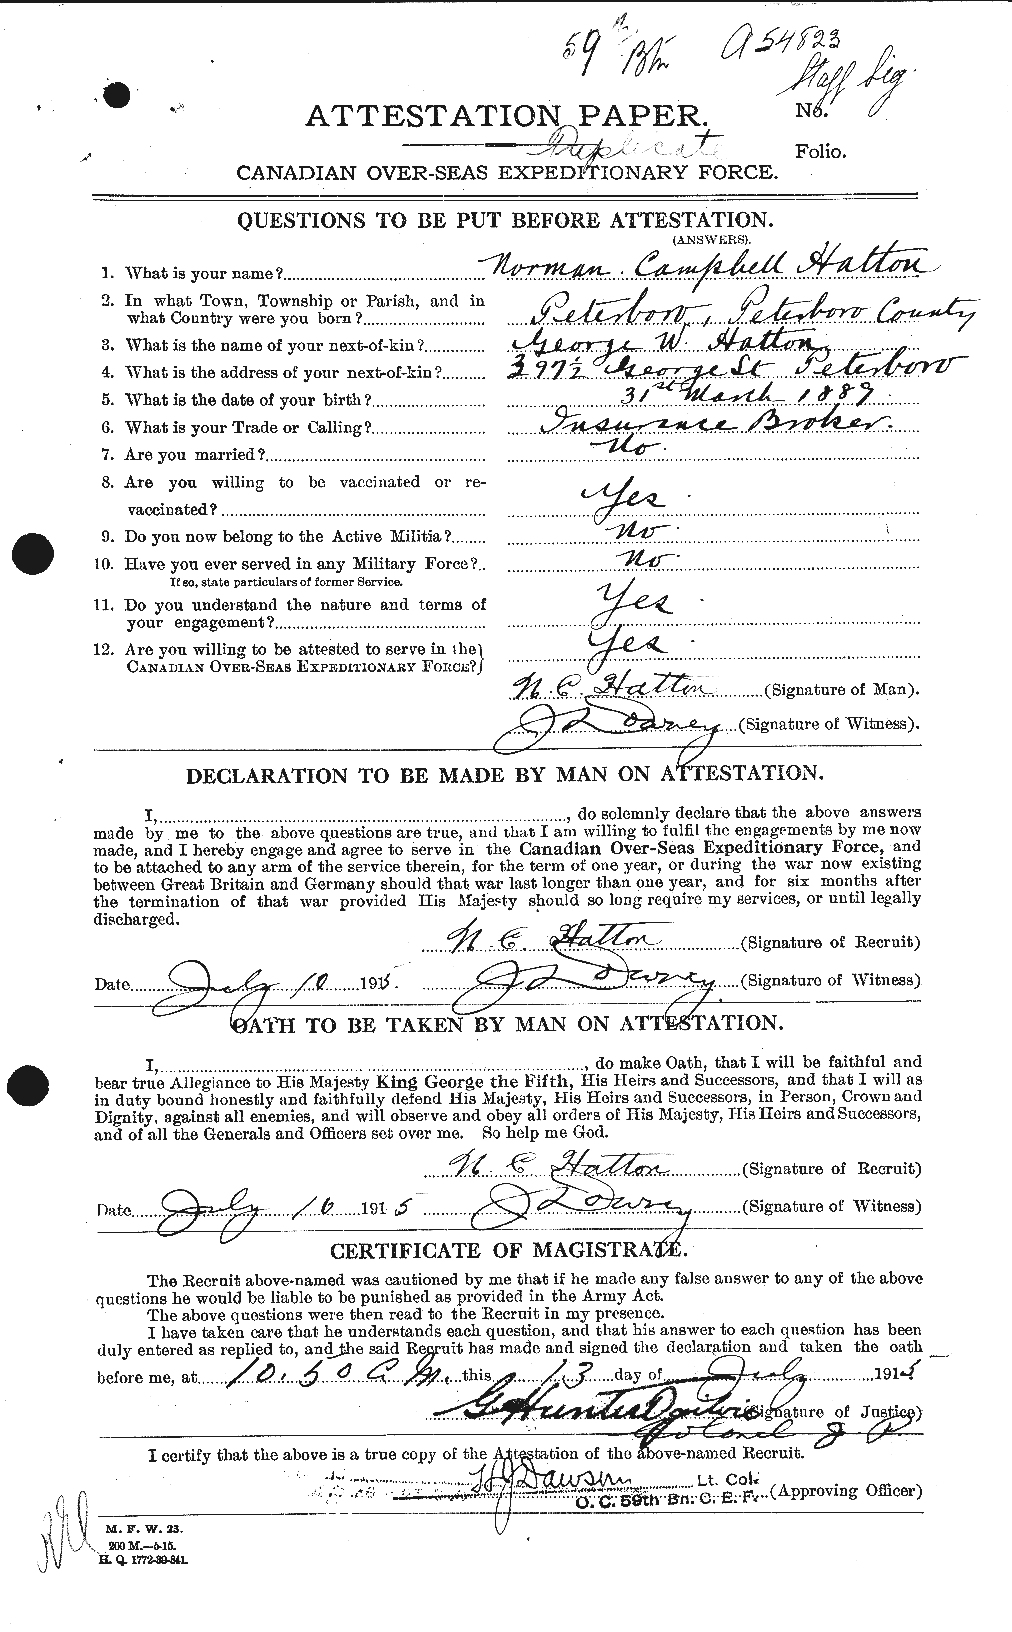 Personnel Records of the First World War - CEF 381353a